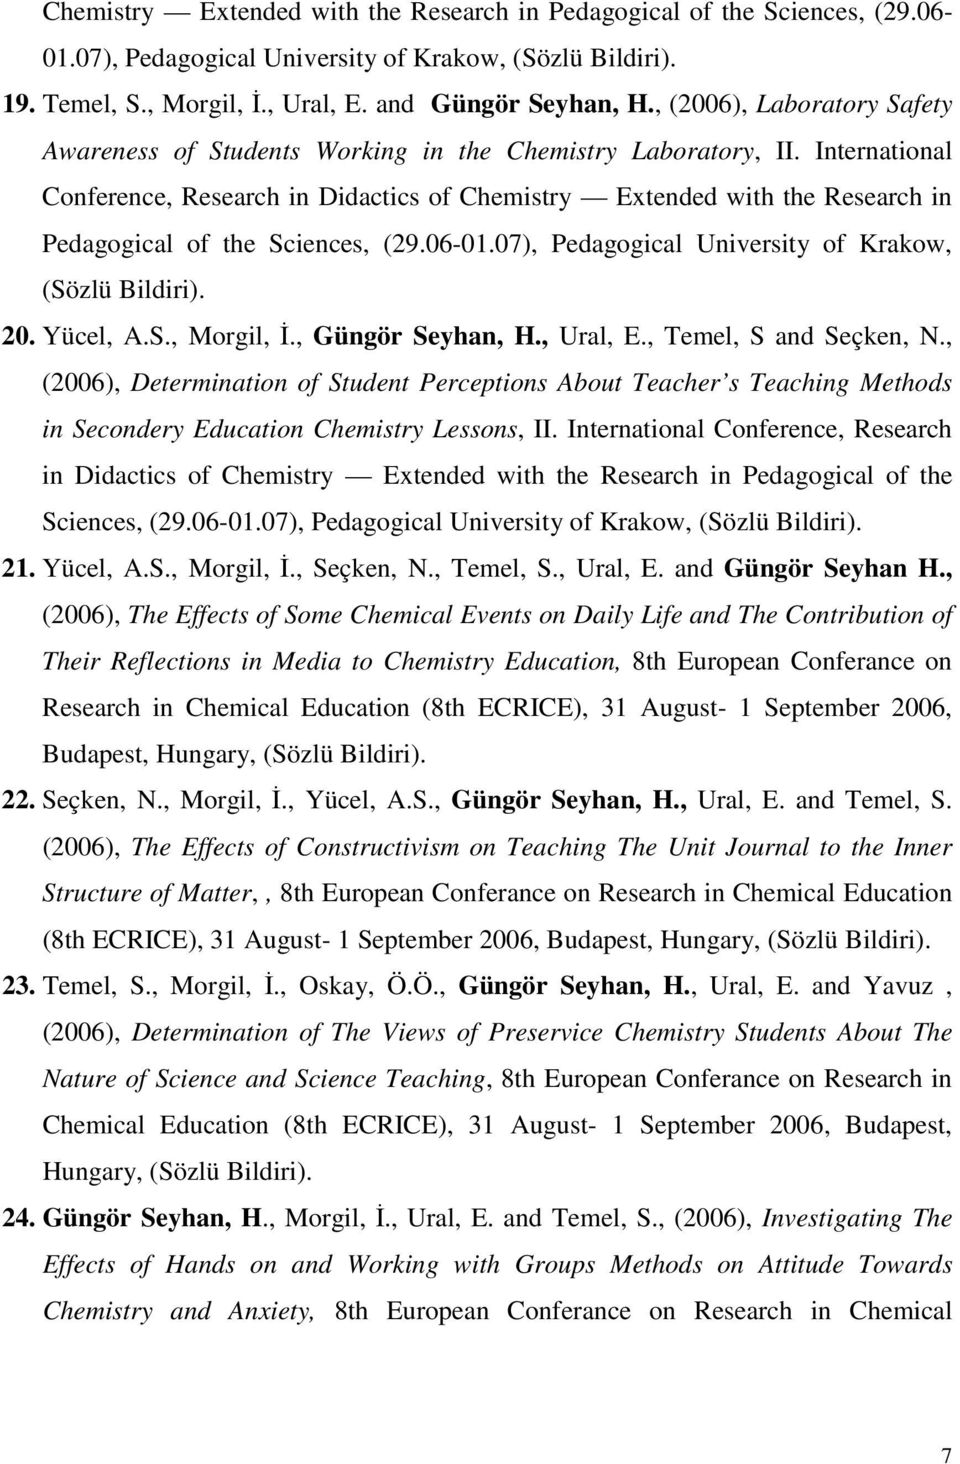 International Conference, Research in Didactics of Chemistry Extended with the Research in Pedagogical of the Sciences, (29.06-01.07), Pedagogical University of Krakow, (Sözlü Bildiri). 20. Yücel, A.